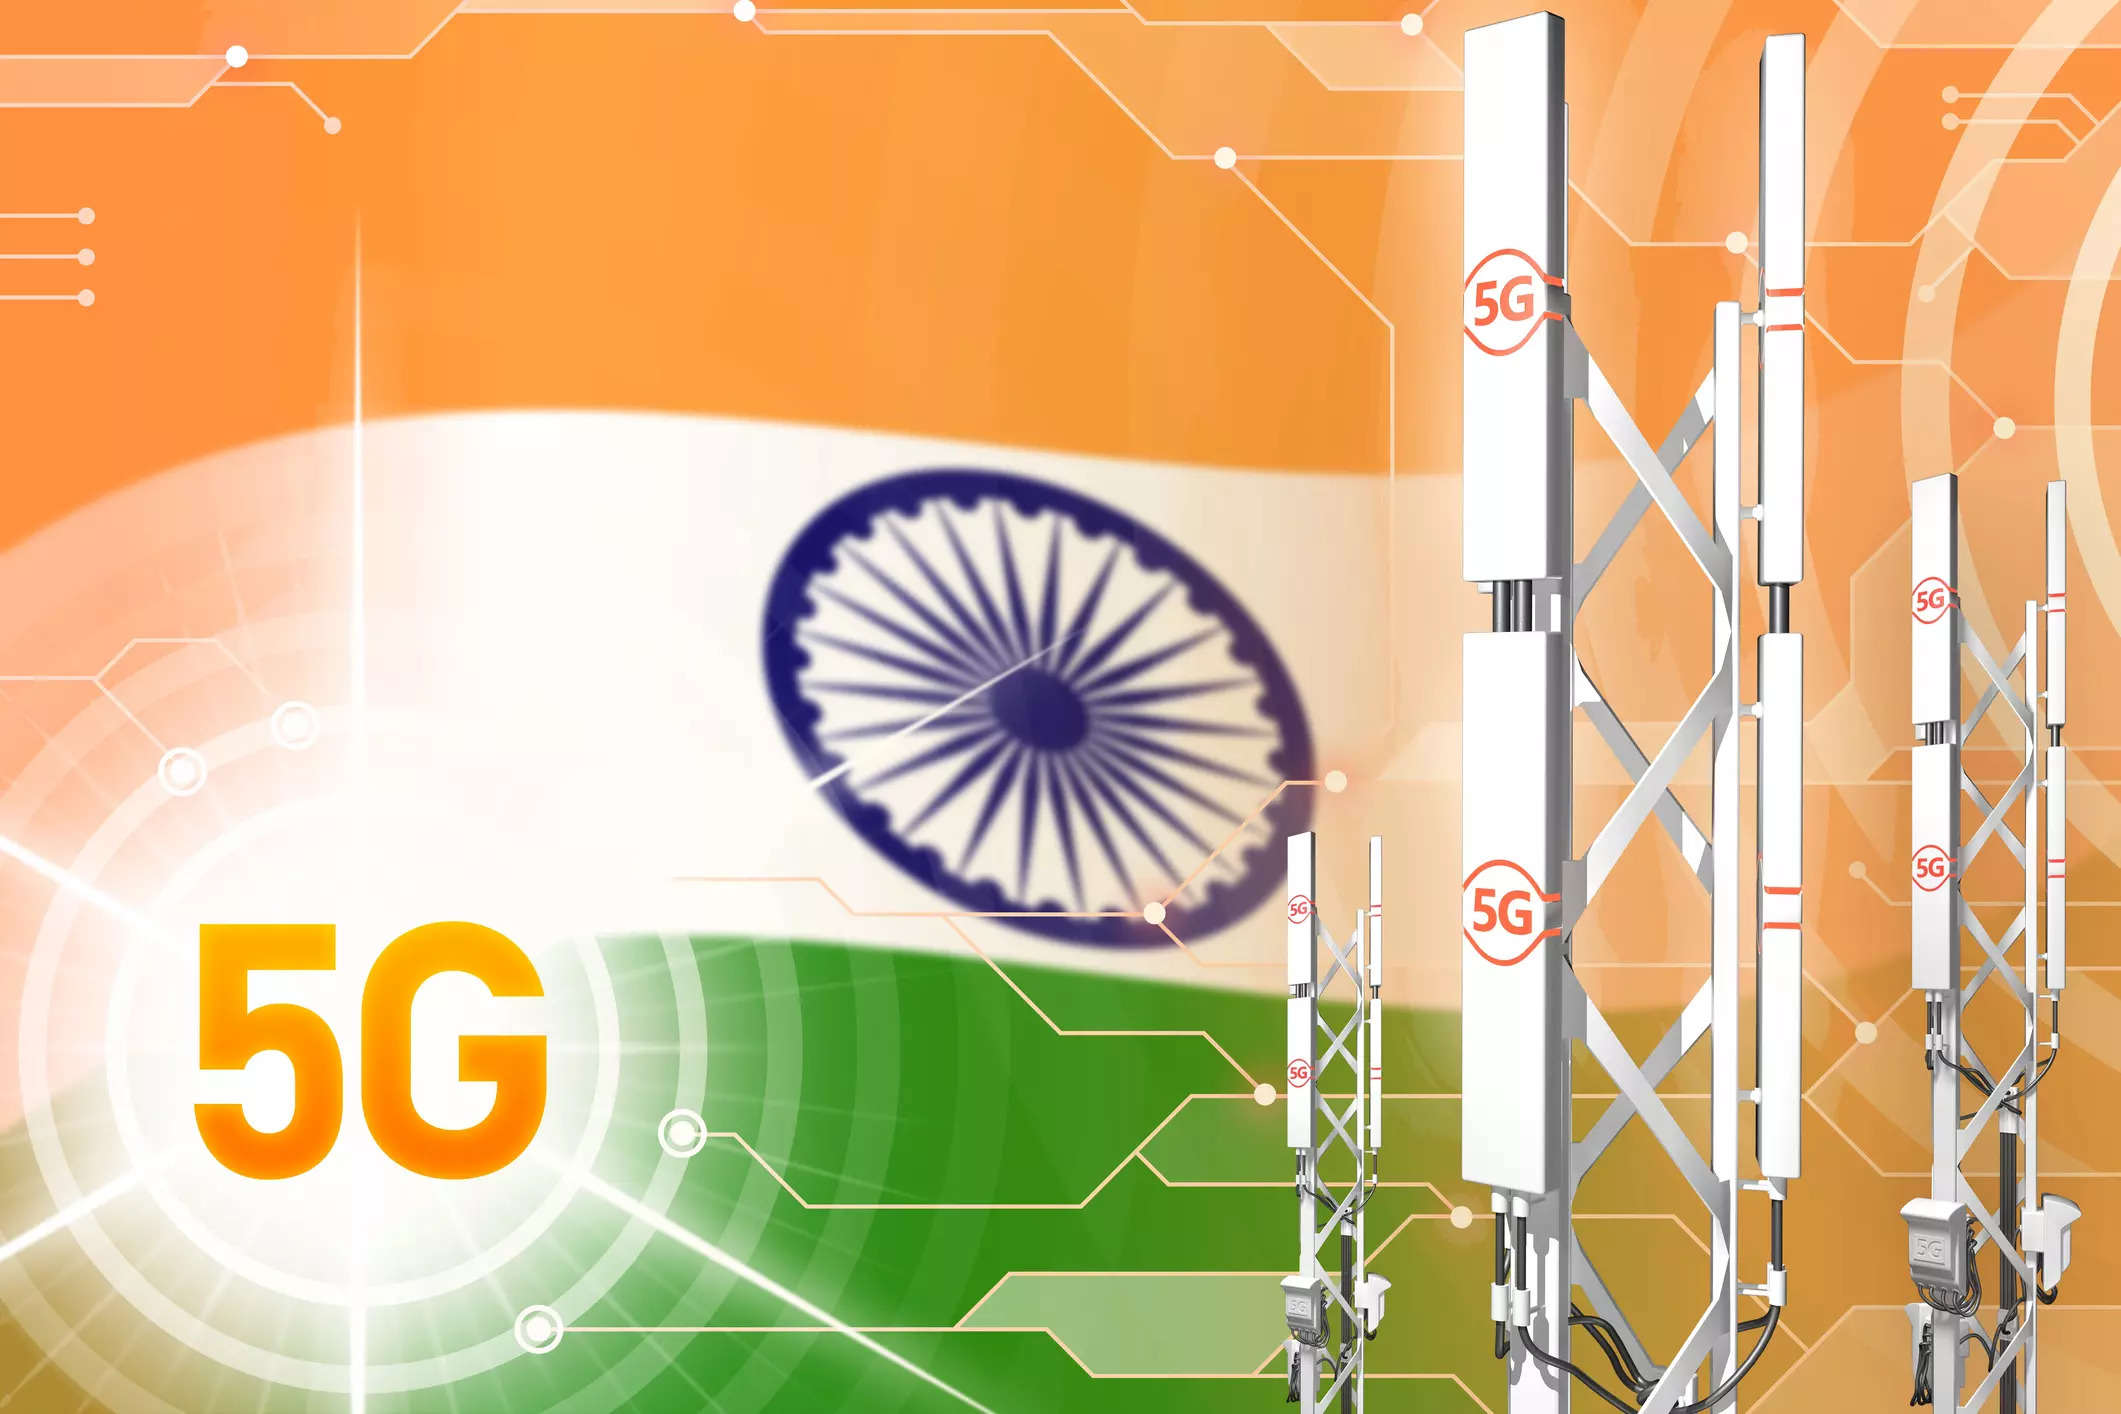 Communication diary: RoW simplification is a major policy shift that will accelerate 5G in India